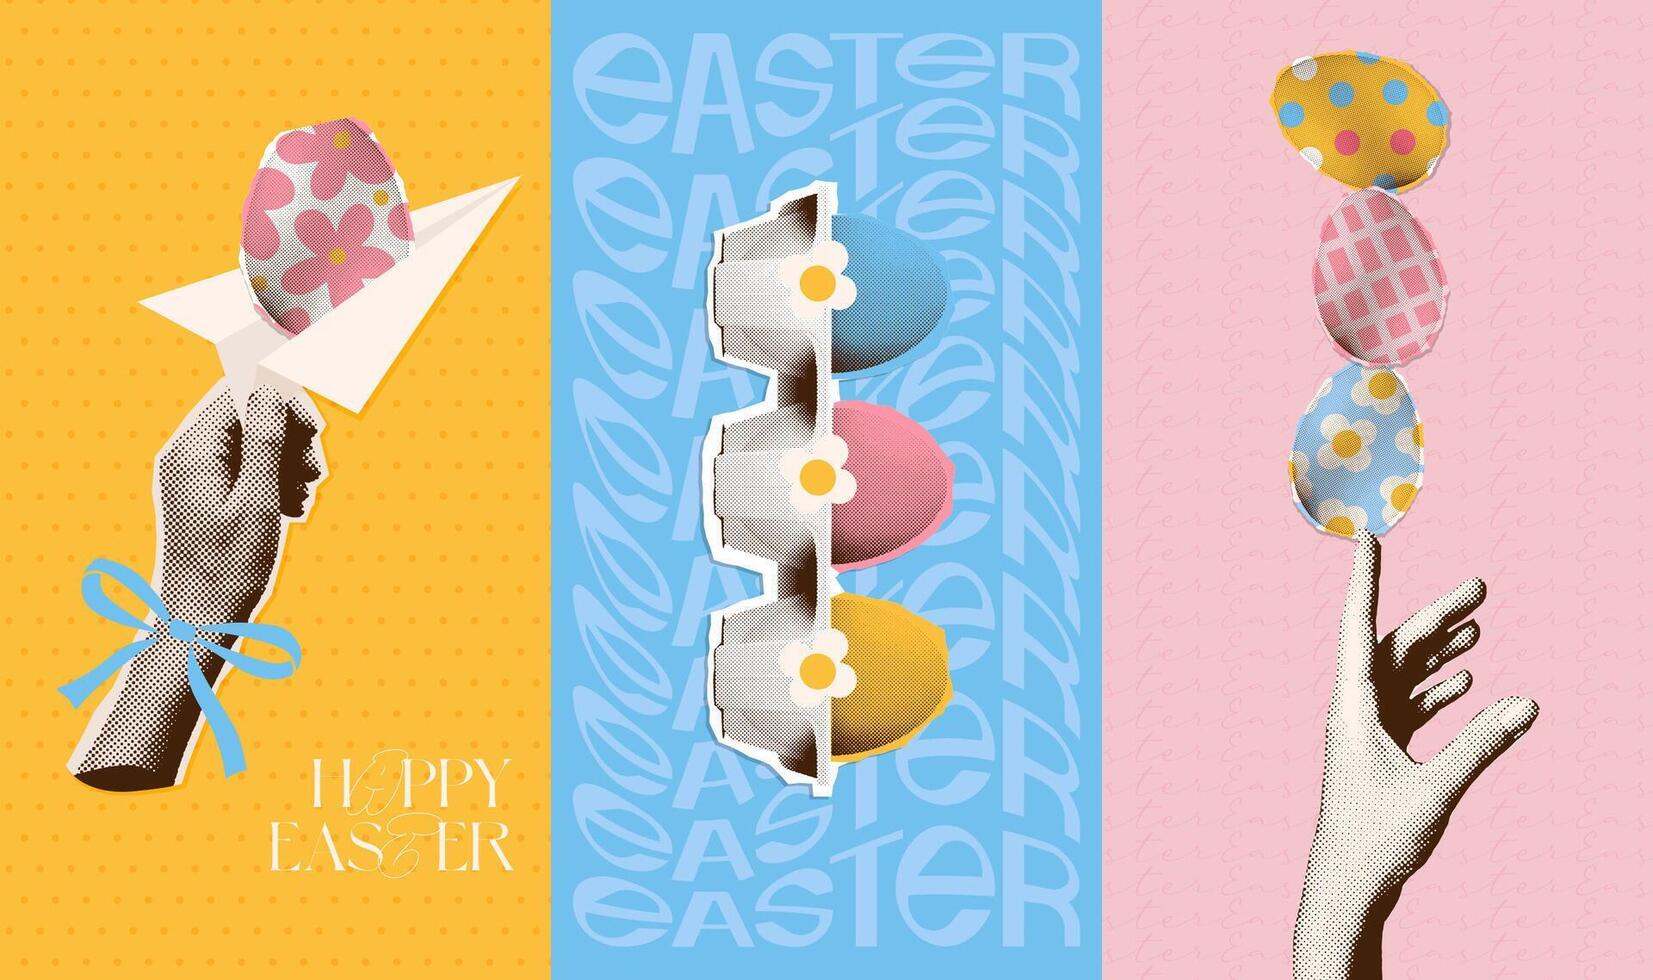 Hand with Easter eggs, balancing eggs pile, decorating Easter egg, Easter egg, sending congratulations. Square halftone collages set. Vector y2k pop art illustration.